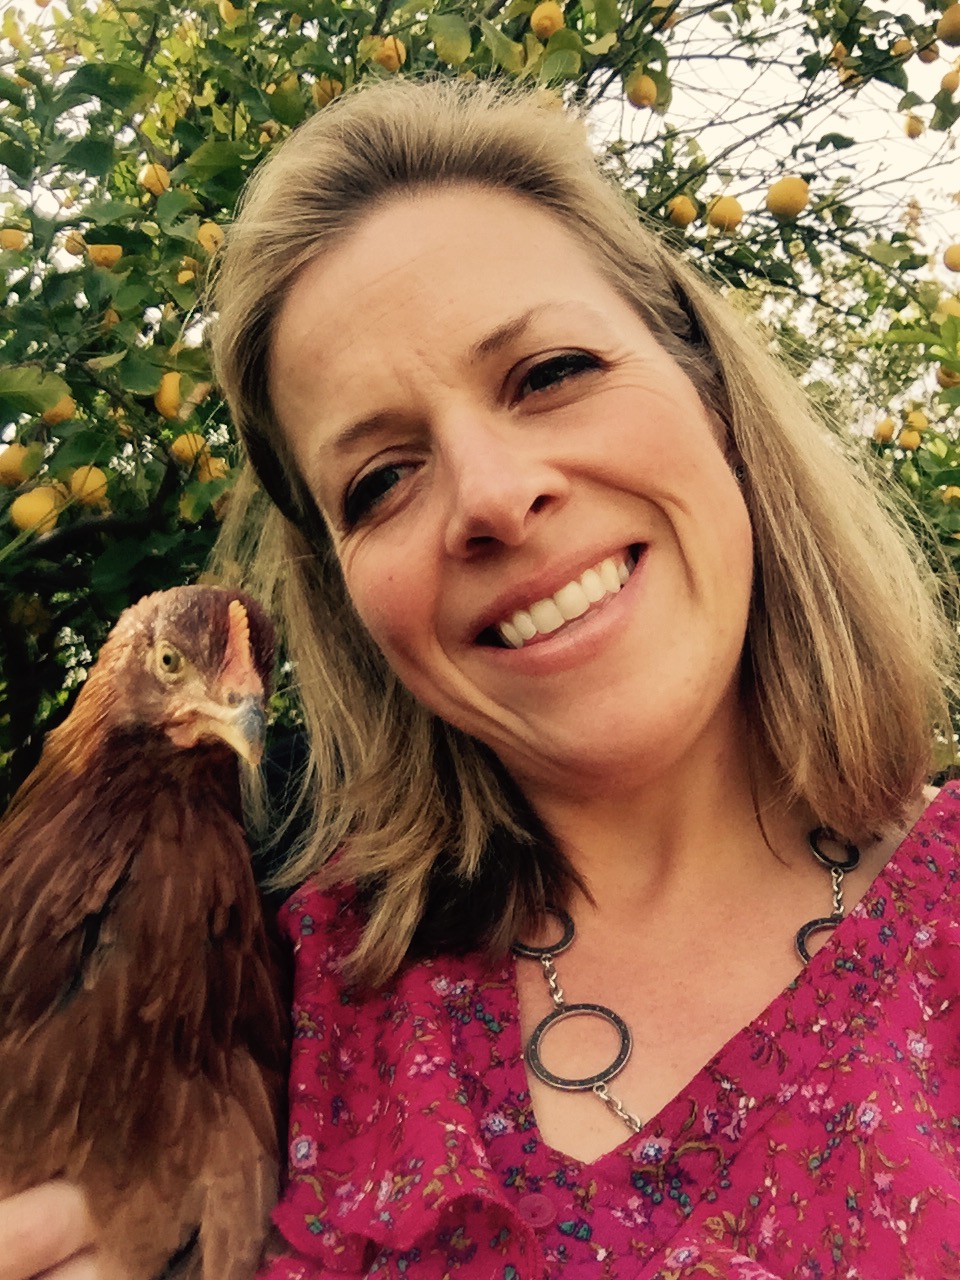 Red does very well for my first Chicken Selfie!